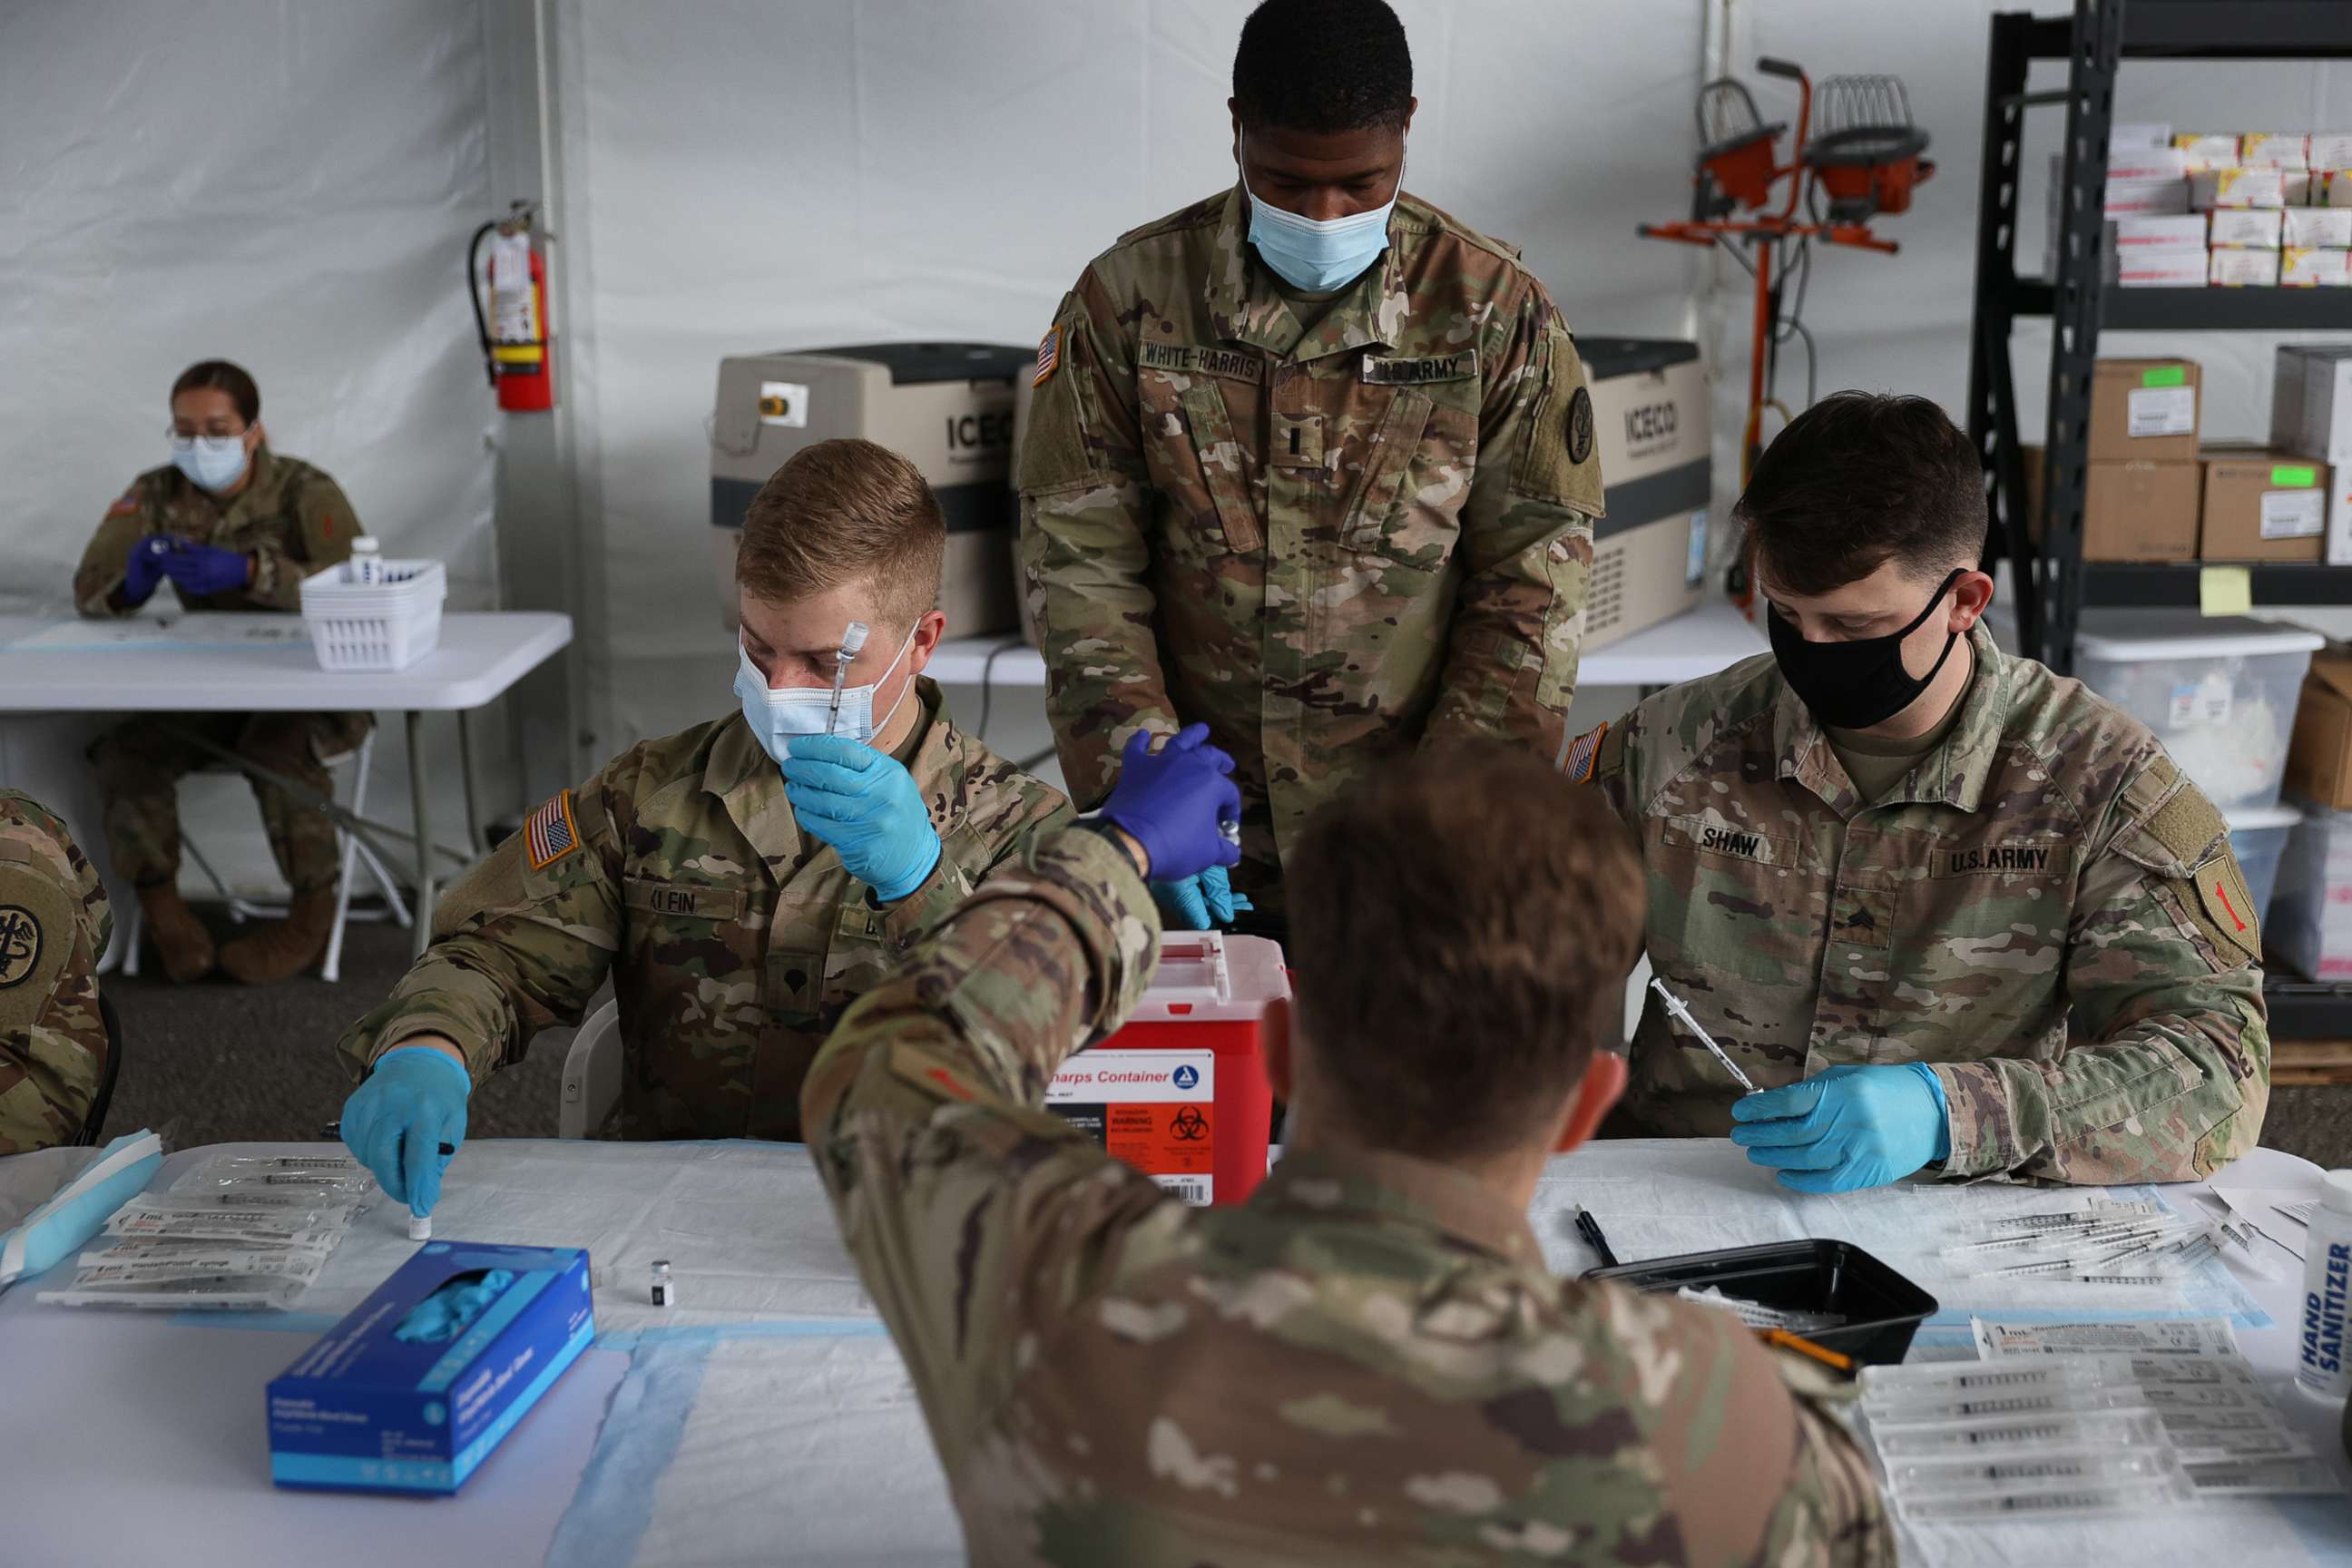 PHOTO: U.S. Army soldiers from the 2nd Armored Brigade Combat Team, 1st Infantry Division, prepare Pfizer COVID-19 vaccines to inoculate people at the Miami Dade College North Campus on March 9, 2021 in Miami.